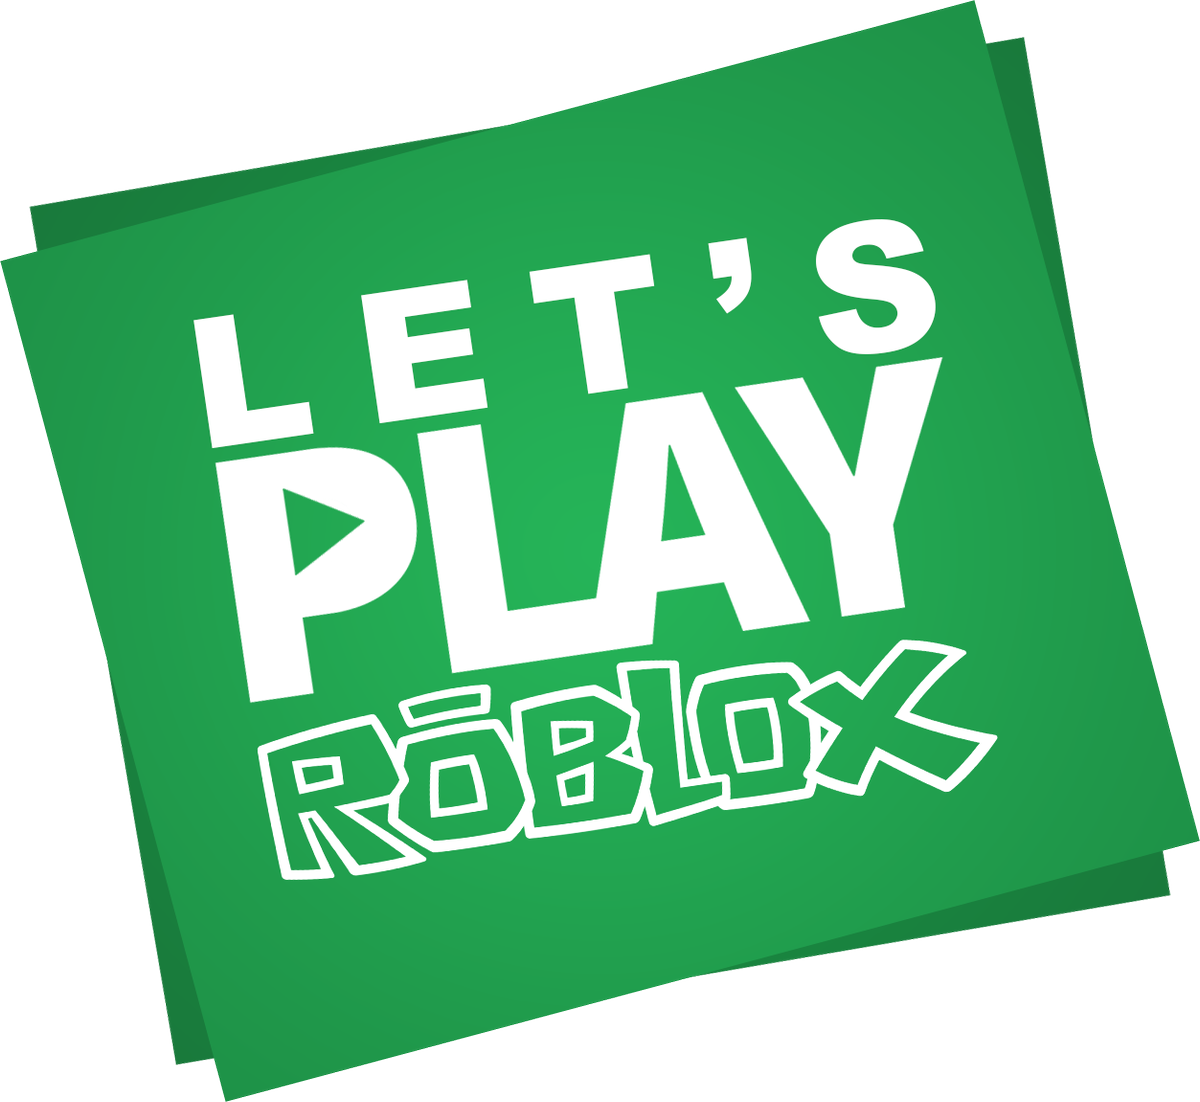 Roblox On Twitter It S Let S Play Wednesday My Dudes This Week - november 2016 roblox ready